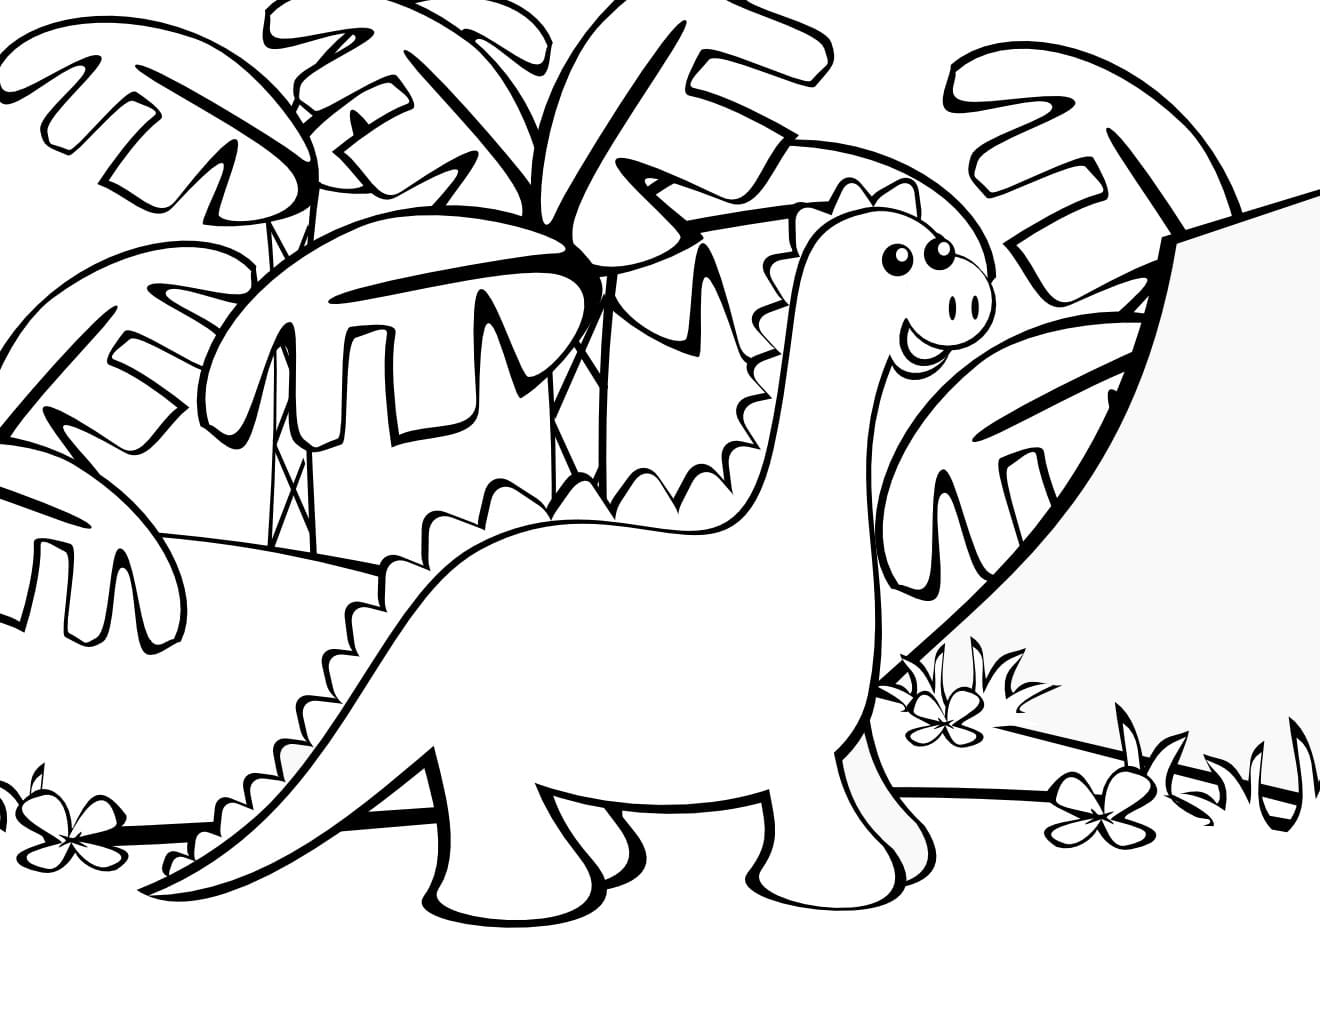 Coloring pages Dinosaurs. Large collection, Print for Free